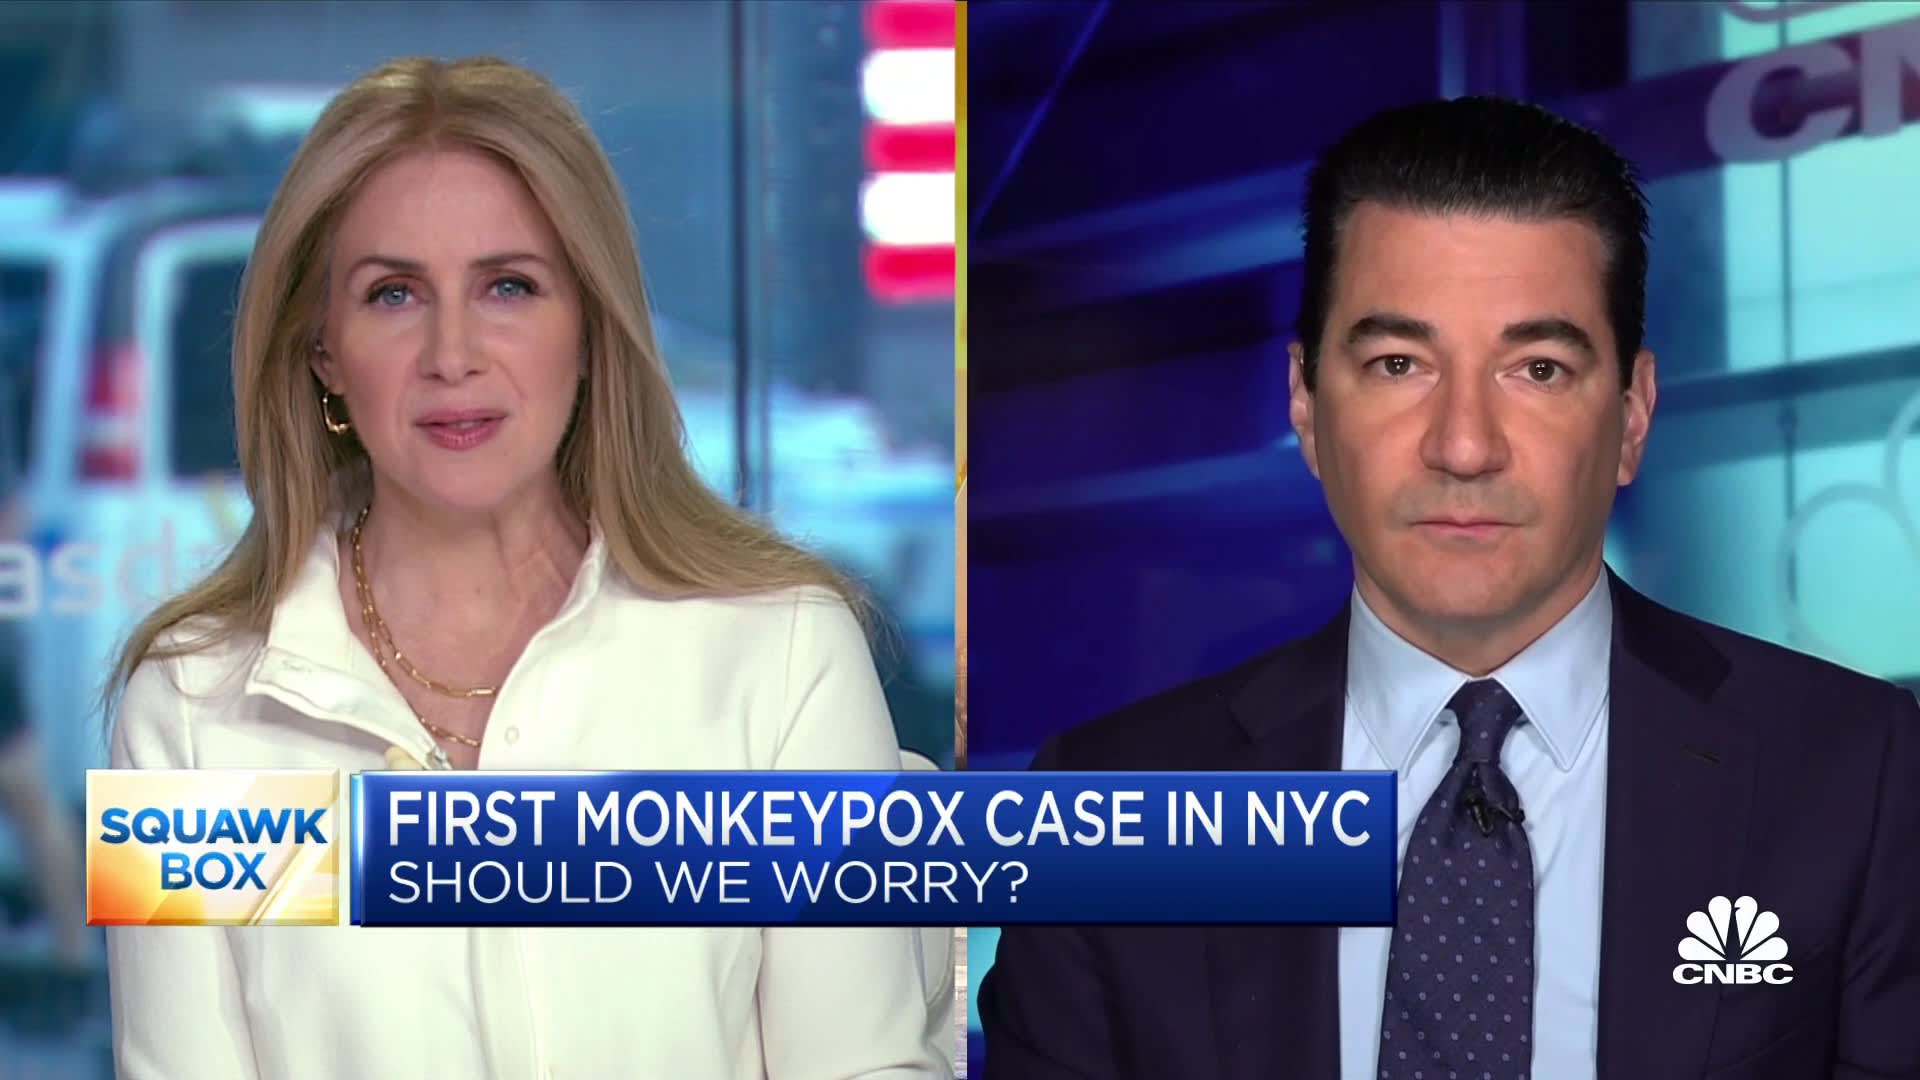 Monkeypox could be difficult to extinguish, says Dr. Scott Gottlieb